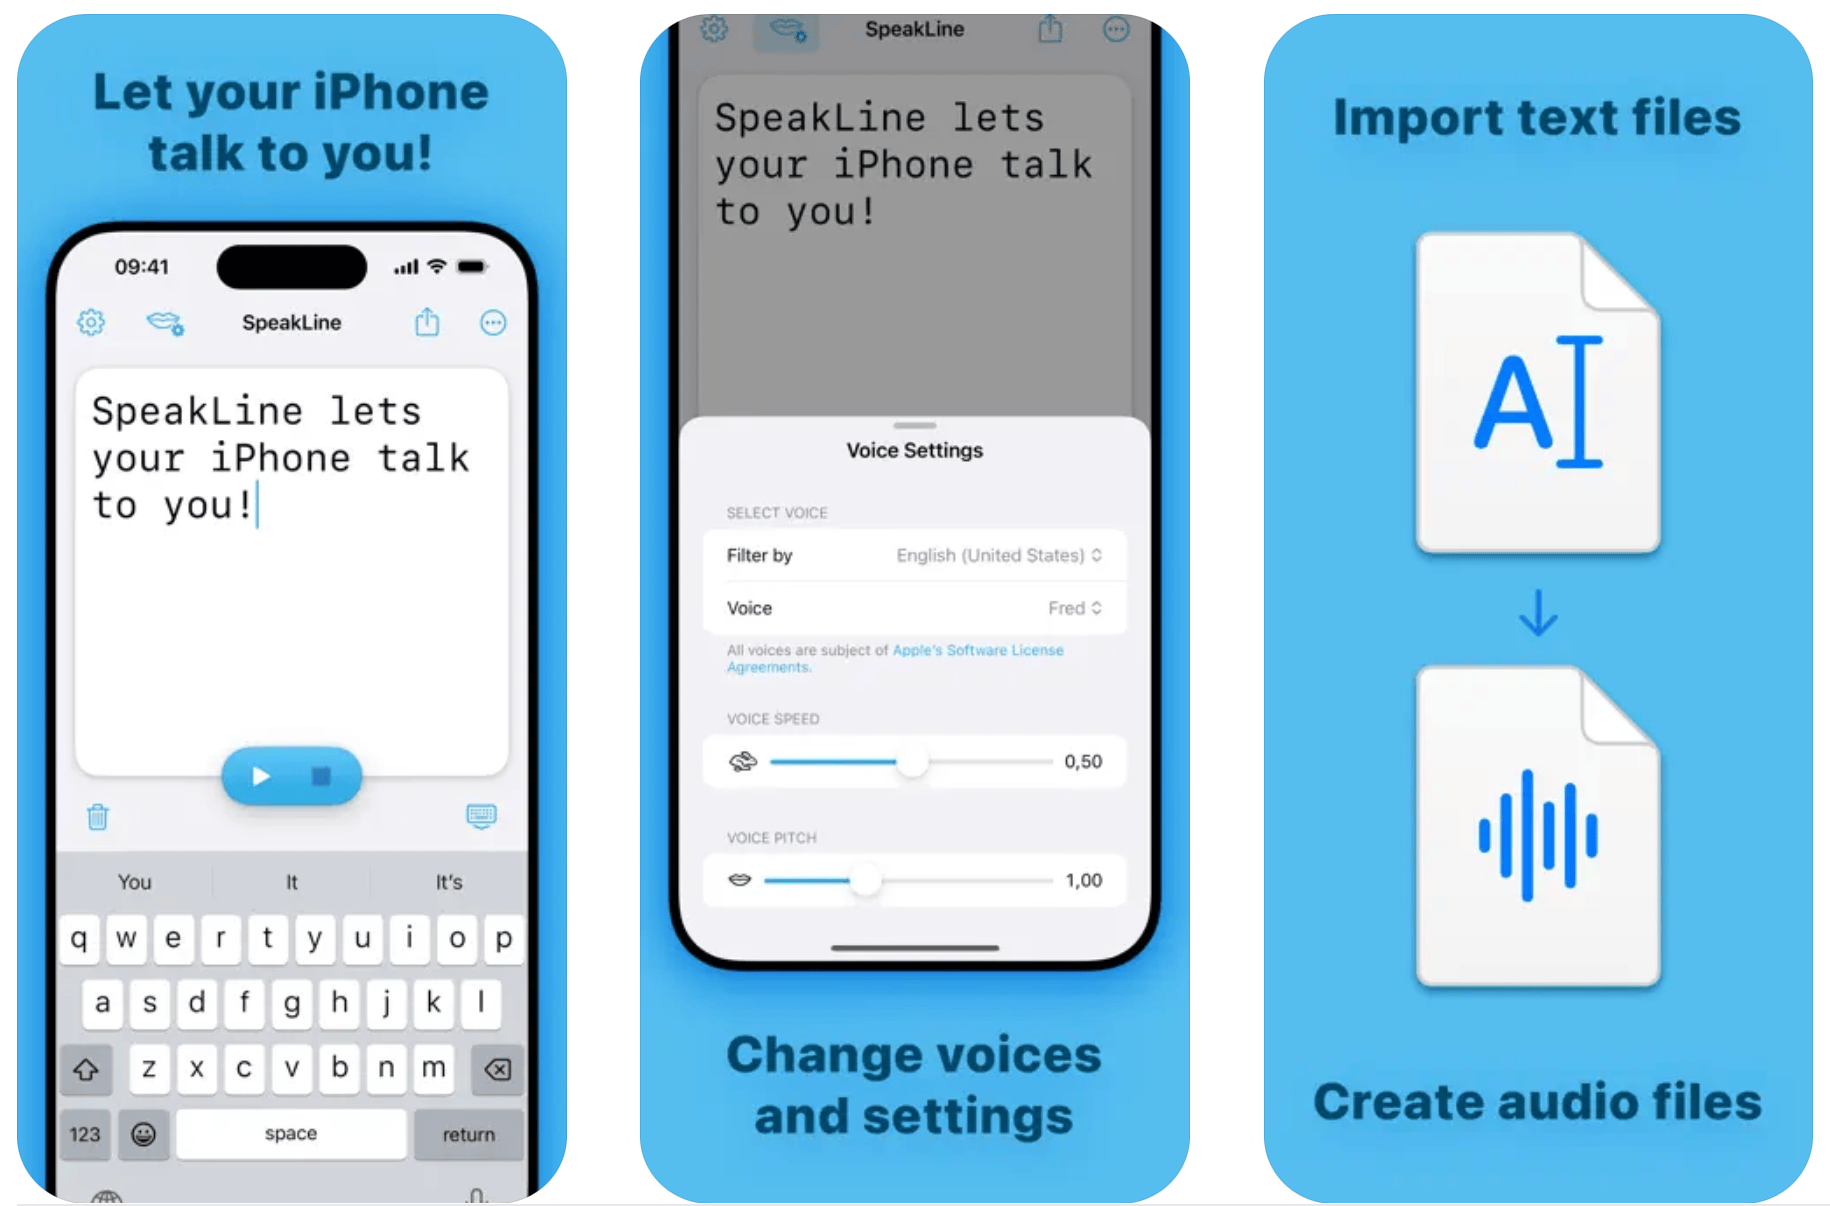 text to speech for all app pro apk